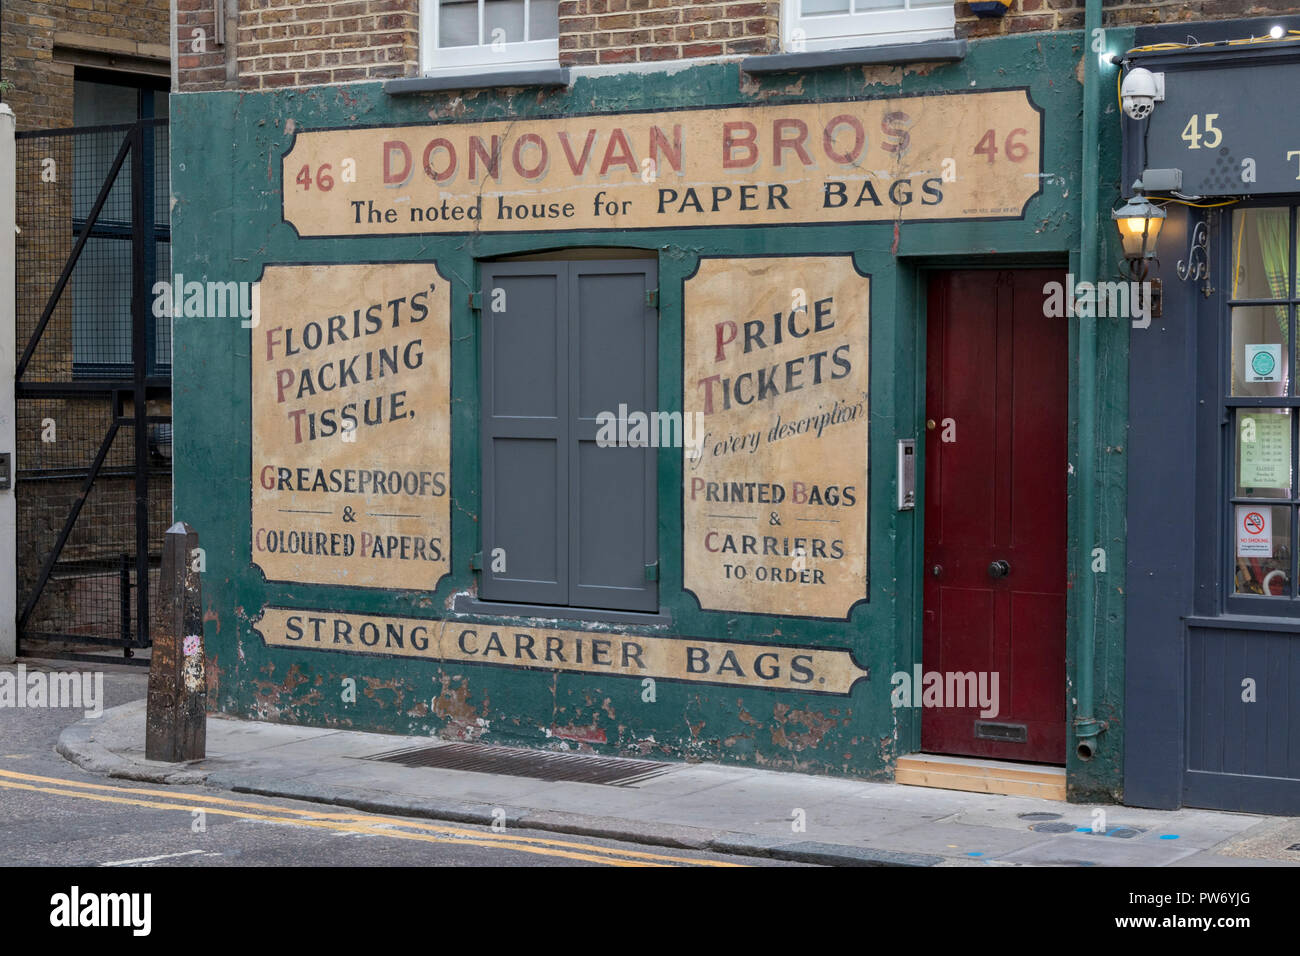 Donovan Bros paper bags shop, Crispin Street in the Old Spitalfields Market in London, England, UK Stock Photo